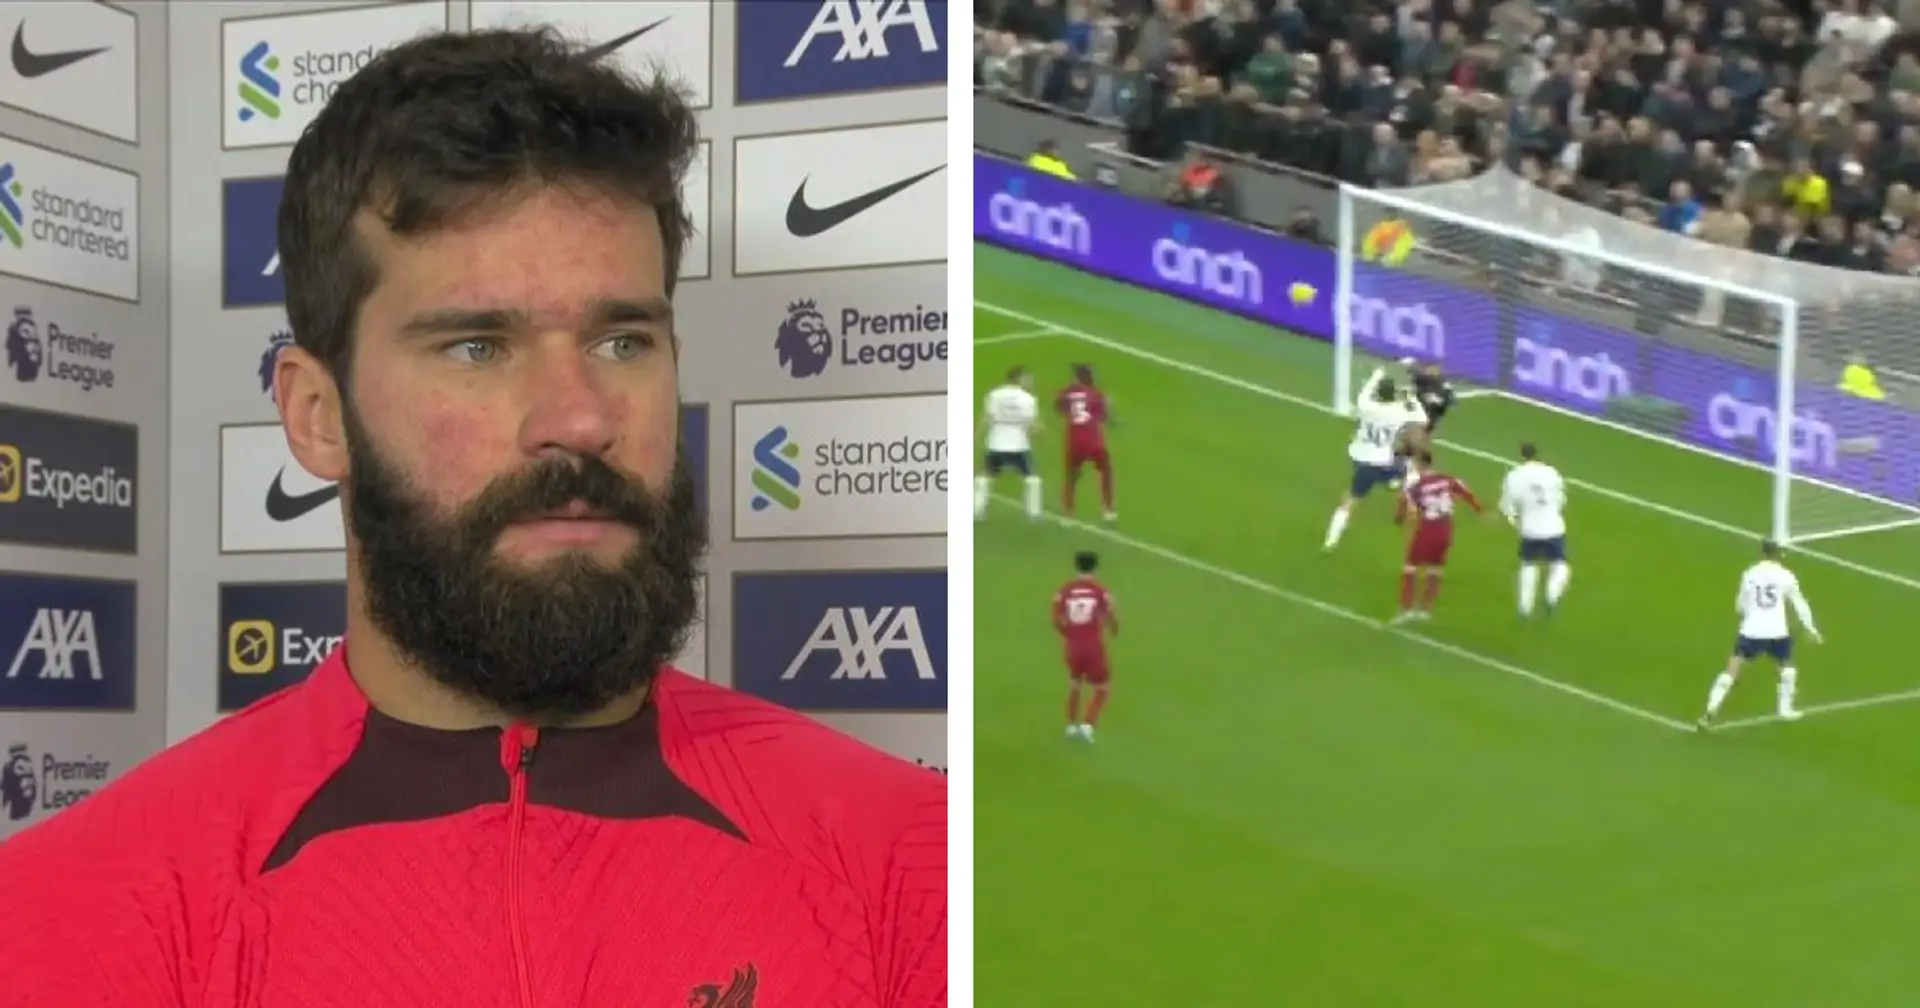 'If the ball was more inside I could do something': Alisson on Bentancur's late chance vs Spurs